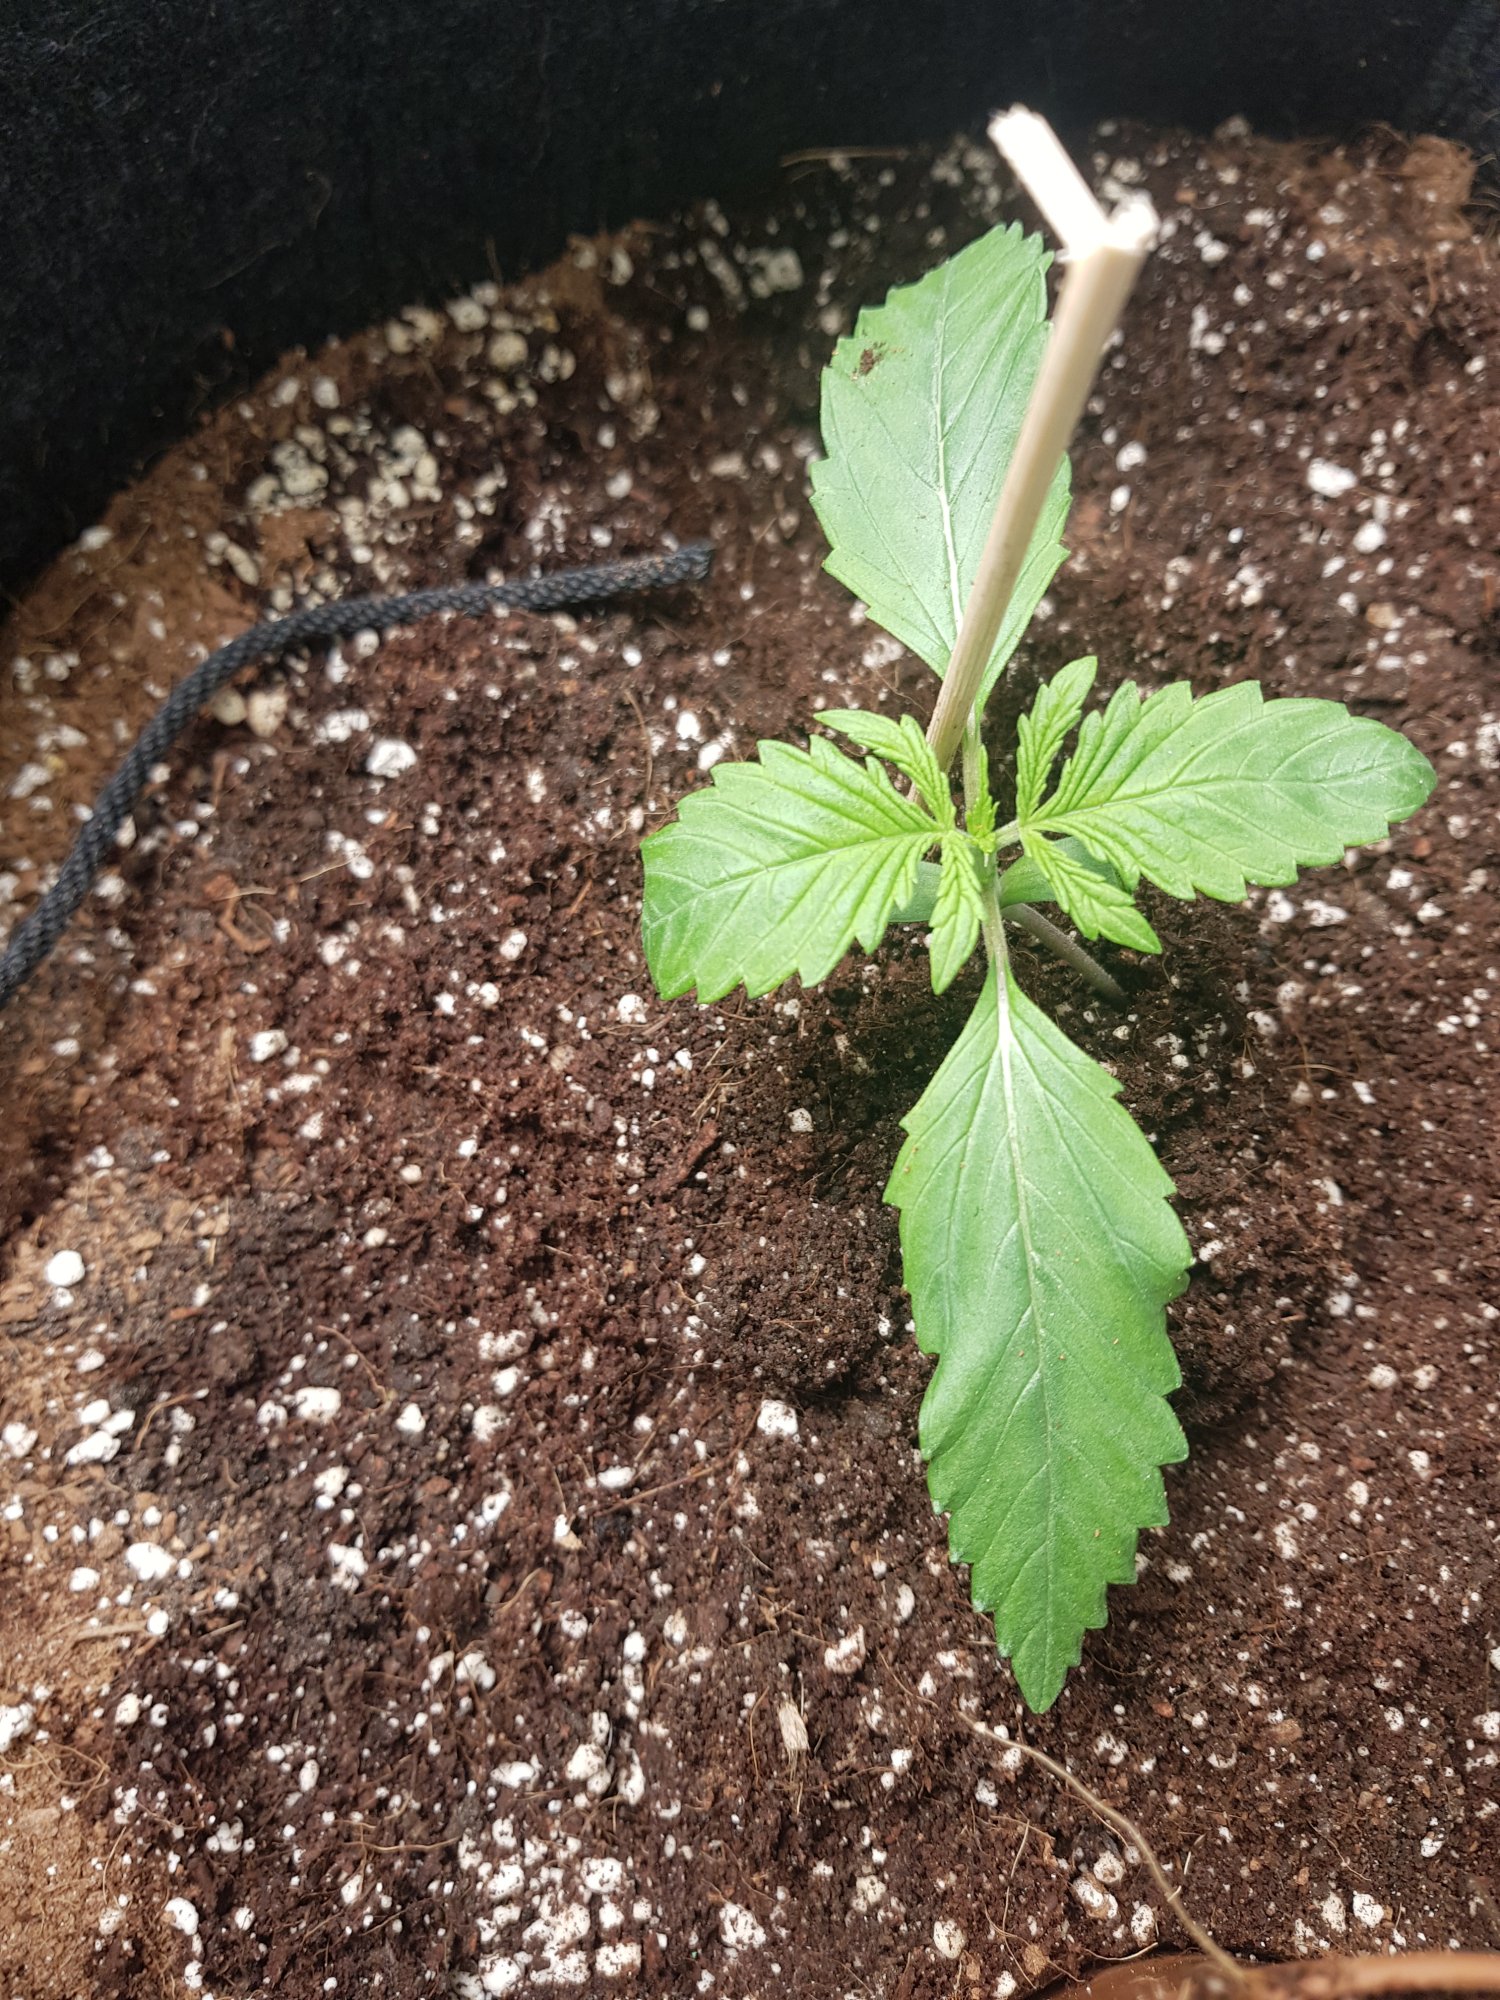 Can it be root rot overwatered